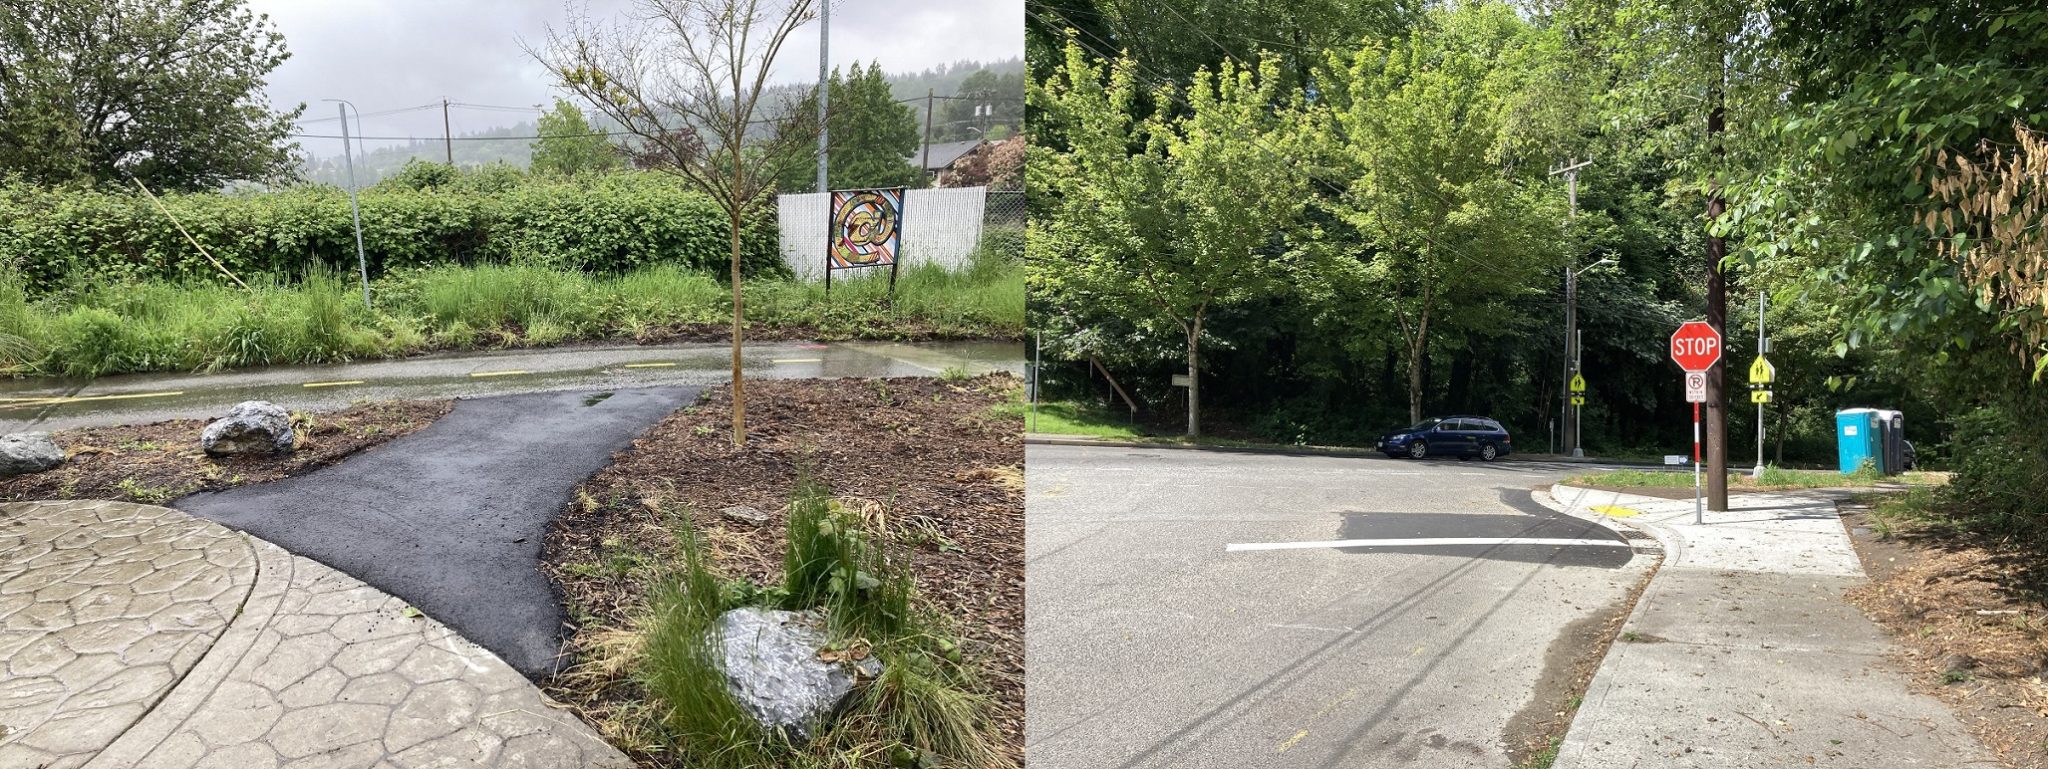 Left: Duwamish Trail pavement repair and trail connection improvements. Right: Dumar Way SW and SW Orchard St rectangular rapid flashing beacon. Green trees and vegetation are present in the background of each photo.